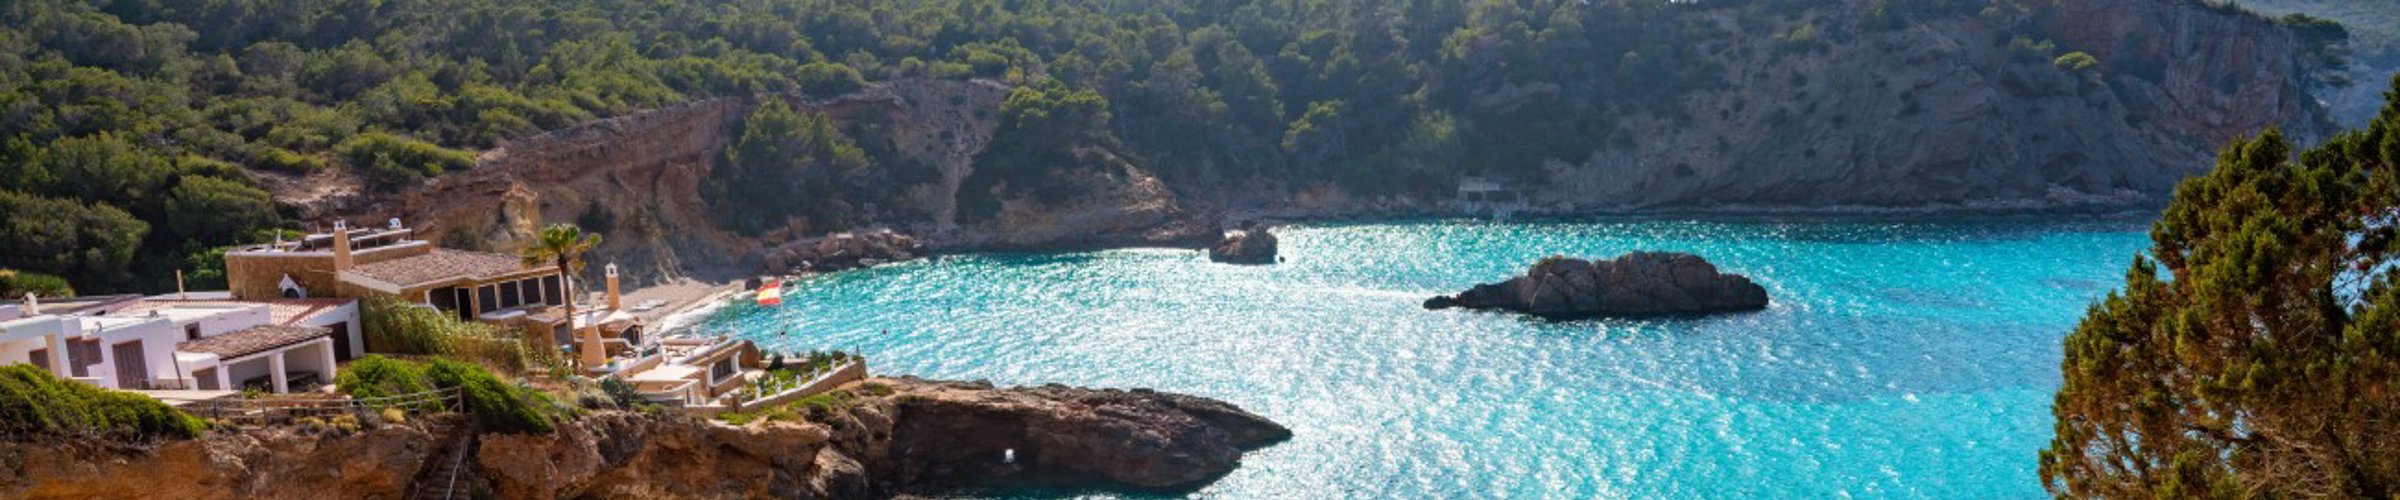 Where Are the Best Quiet Places to Stay In Ibiza?